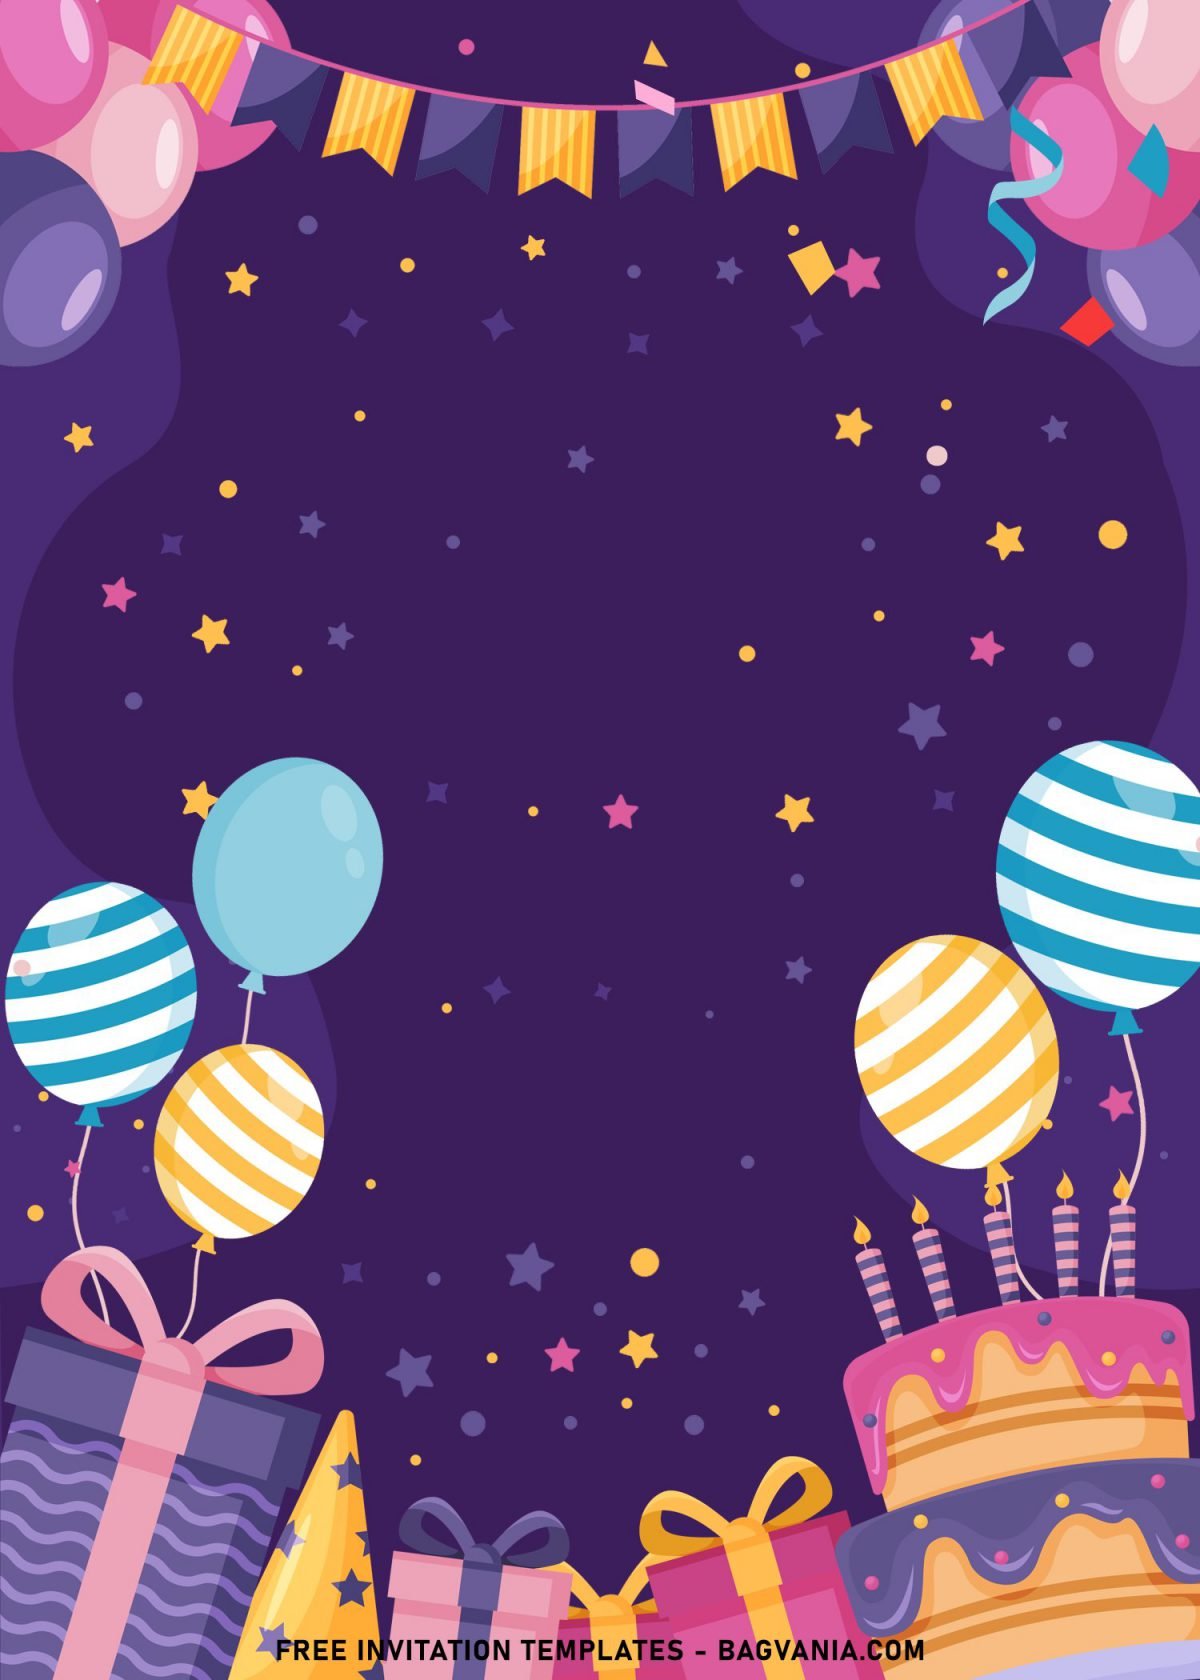 7+ Fun Birthday Invitation Templates For Your Kid's Birthday Party and has colorful stars